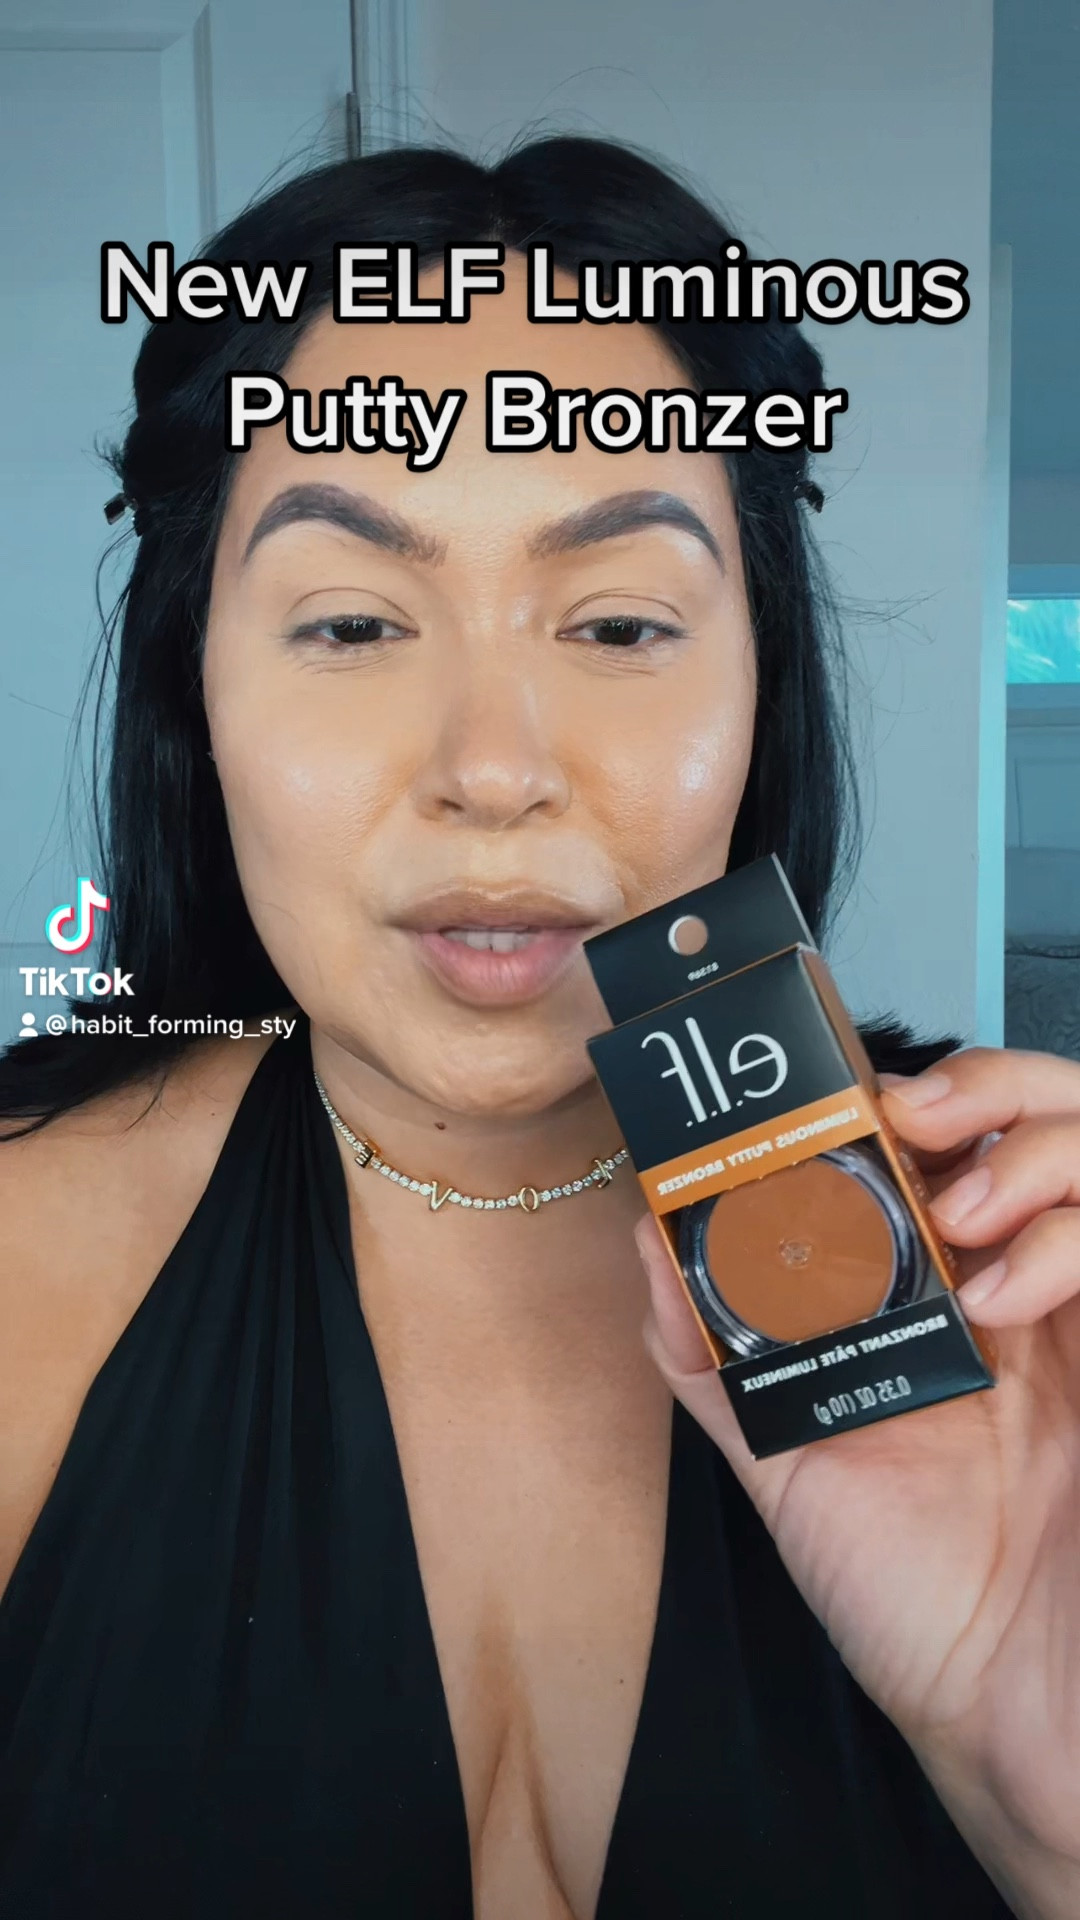 Bronze shimmer luminous cream curated on LTK